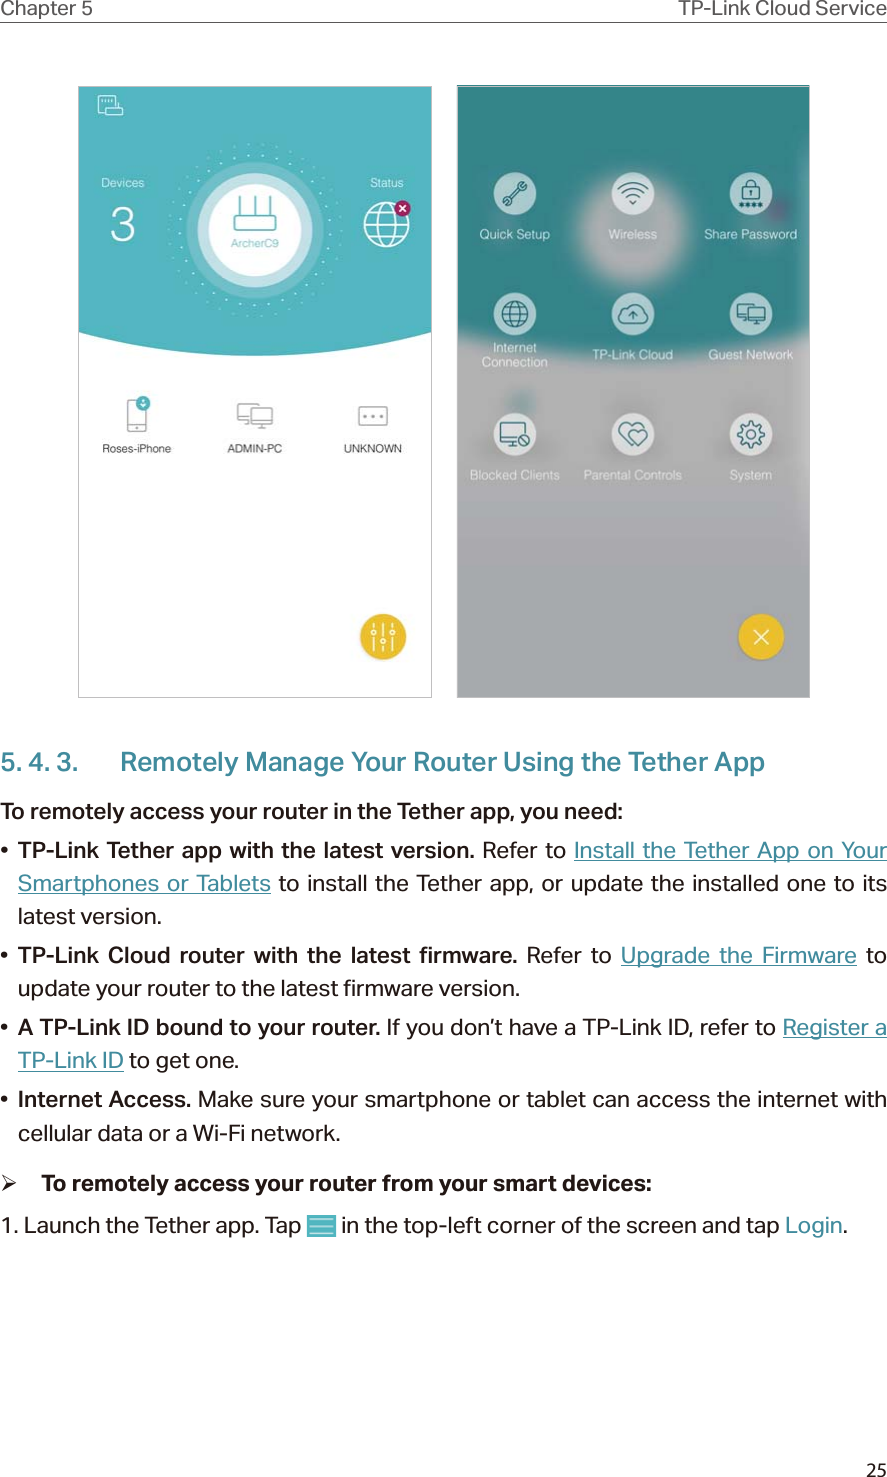 25Chapter 5 TP-Link Cloud Service     5. 4. 3.  Remotely Manage Your Router Using the Tether AppTo remotely access your router in the Tether app, you need:•  TP-Link Tether app with the latest version. Refer to Install the Tether App on Your Smartphones or Tablets to install the Tether app, or update the installed one to its latest version.•  TP-Link Cloud router with the latest firmware. Refer to Upgrade the Firmware to update your router to the latest firmware version.•  A TP-Link ID bound to your router. If you don’t have a TP-Link ID, refer to Register a TP-Link ID to get one.•  Internet Access. Make sure your smartphone or tablet can access the internet with cellular data or a Wi-Fi network. ¾To remotely access your router from your smart devices:1. Launch the Tether app. Tap   in the top-left corner of the screen and tap Login.